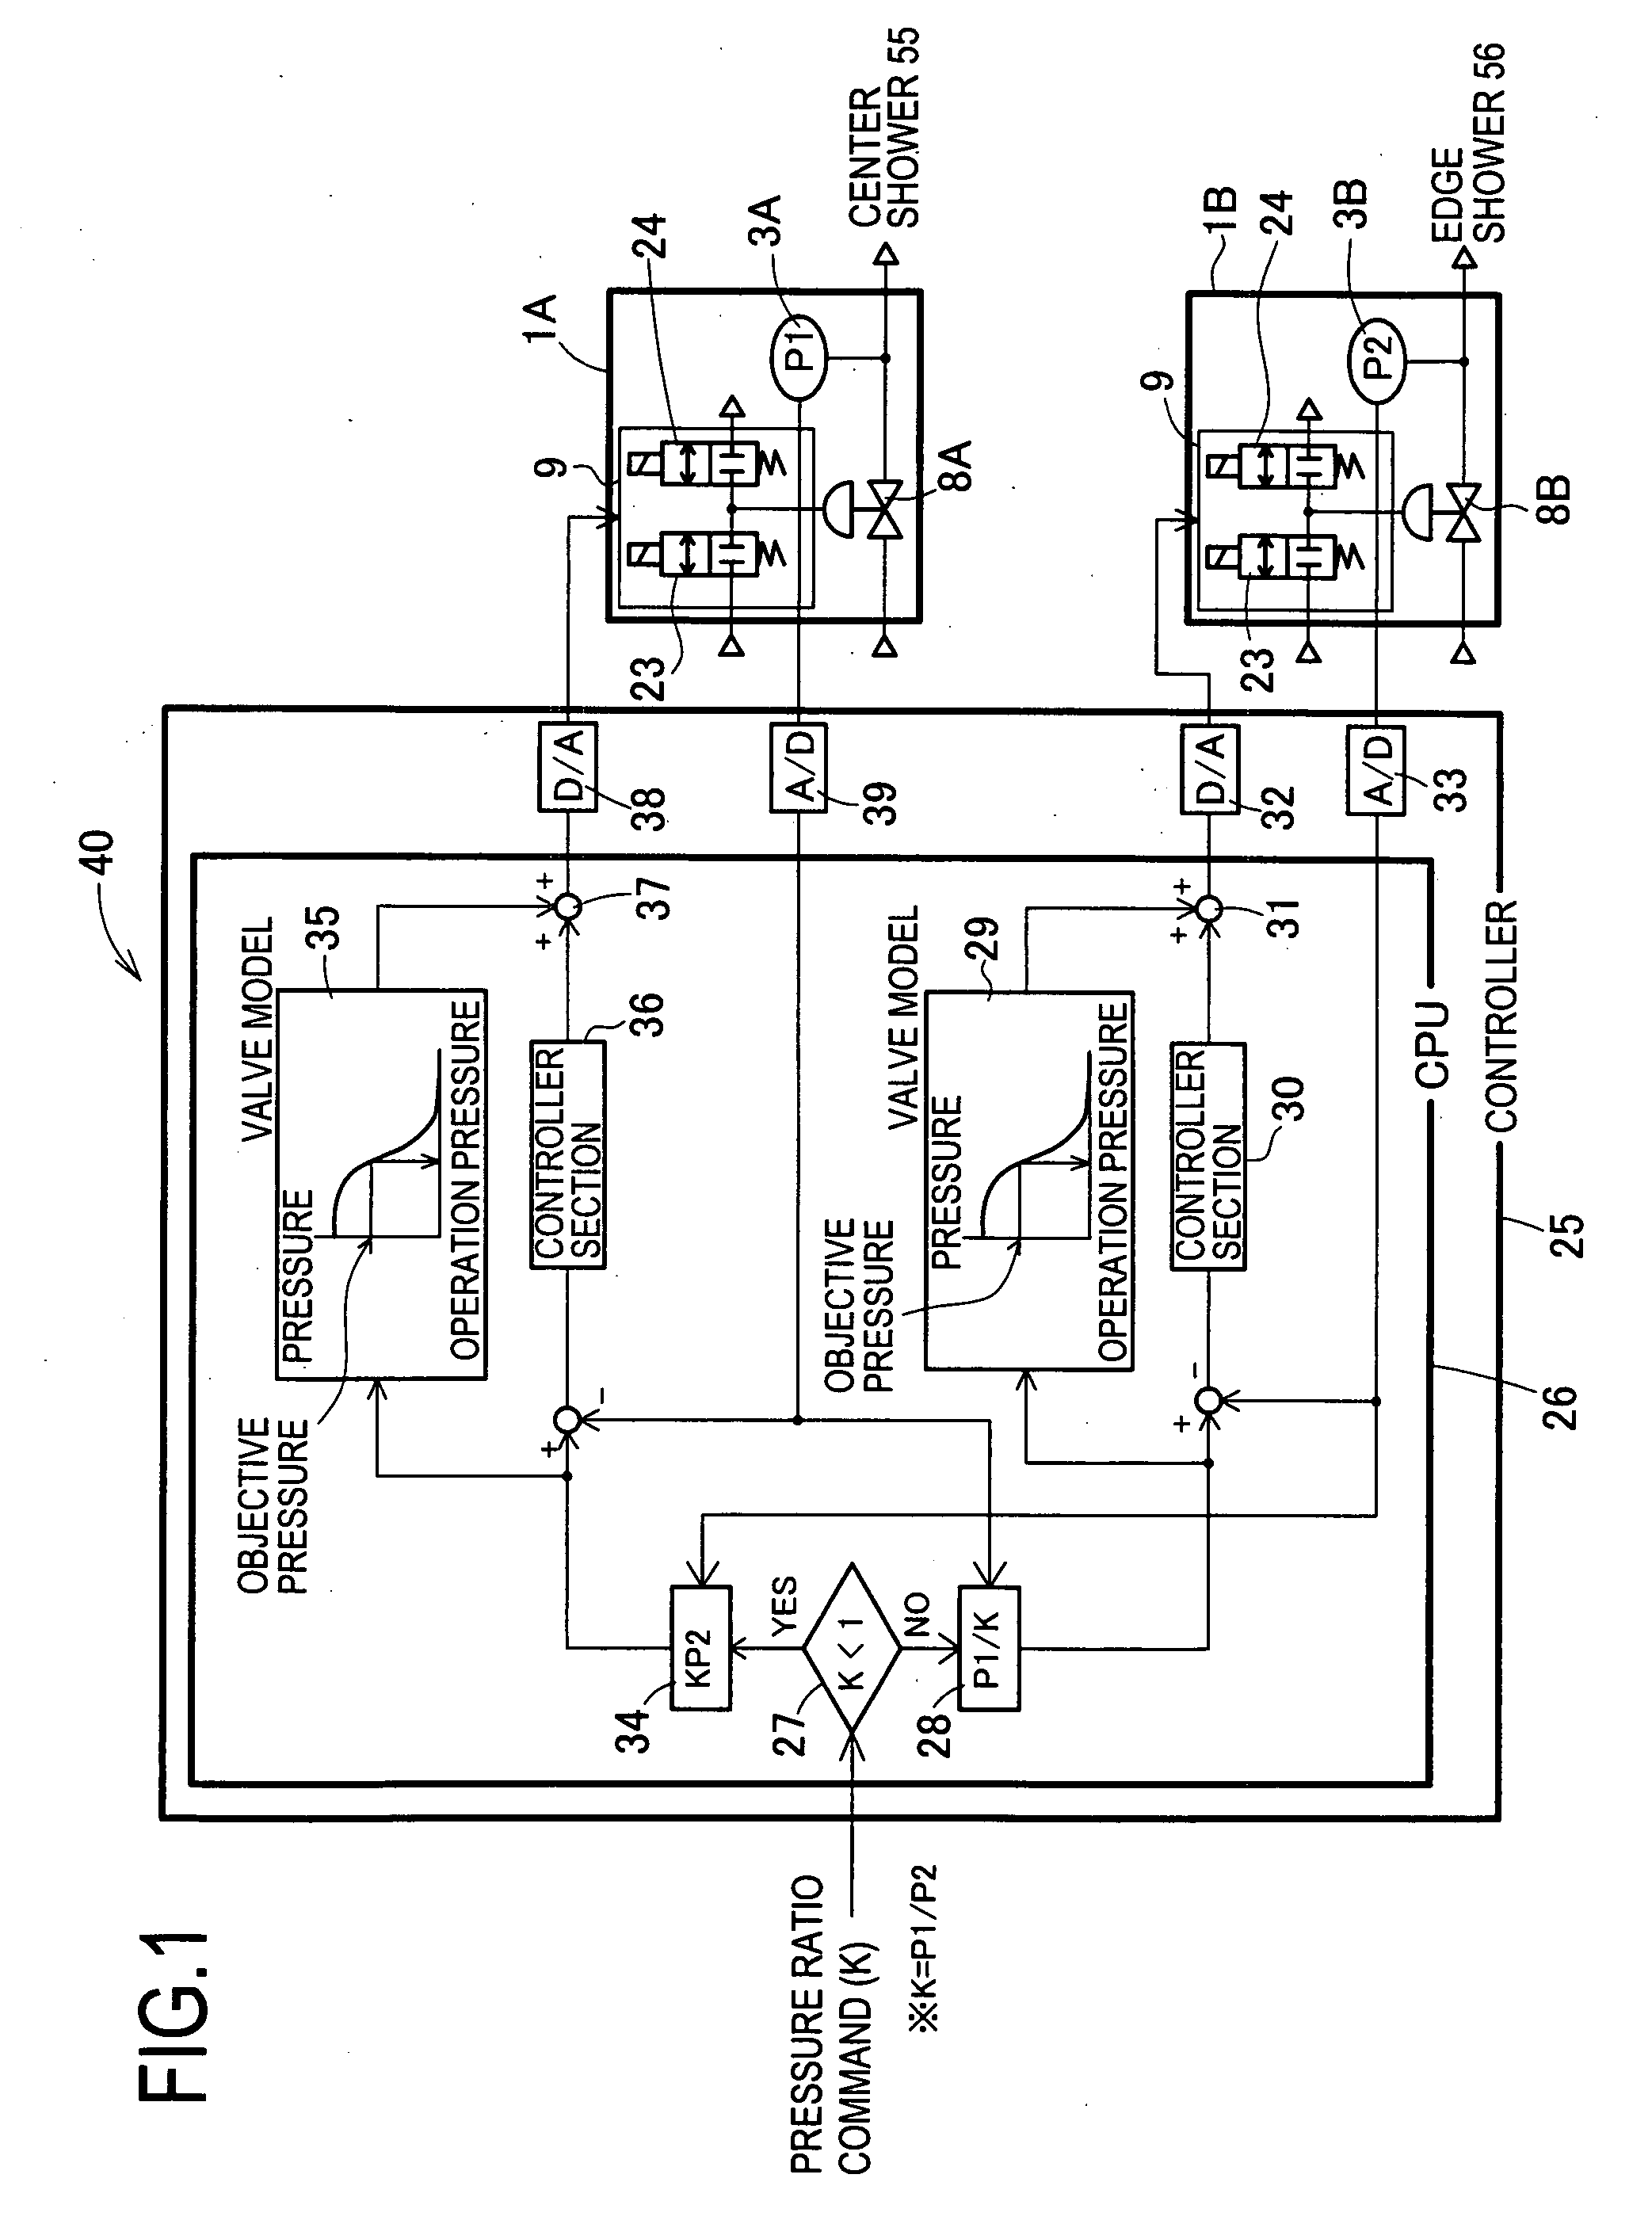 Relative pressure control system and relative flow control system